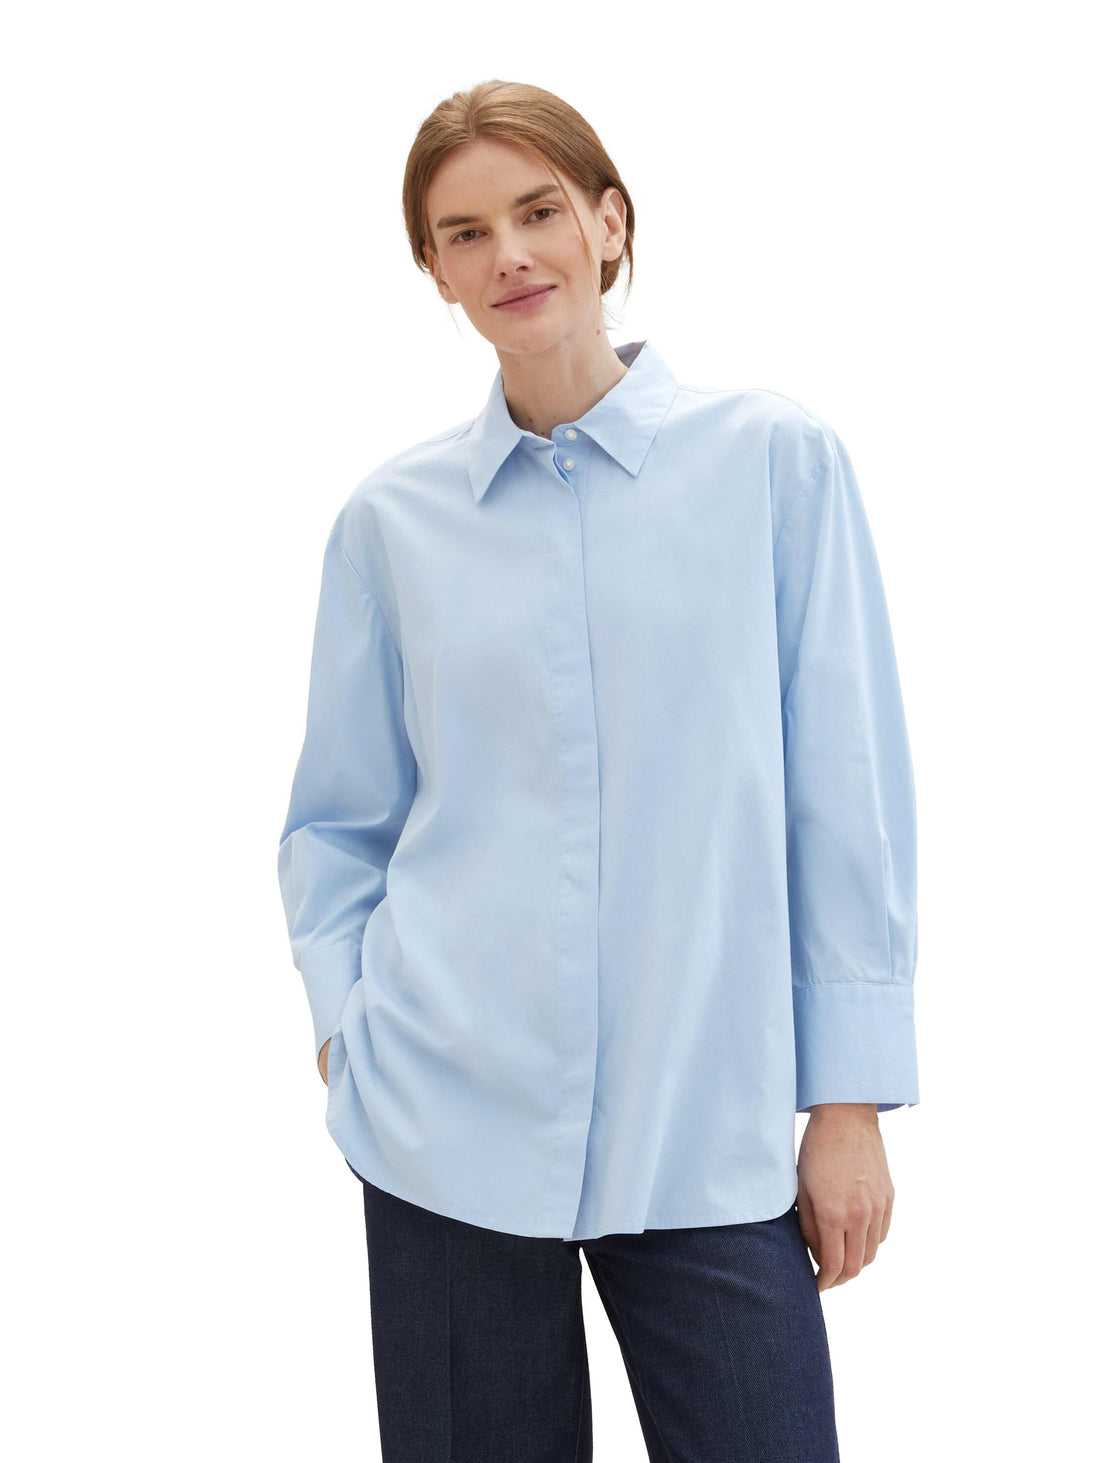 Solid Blouse Shirt_1040315_34587_01